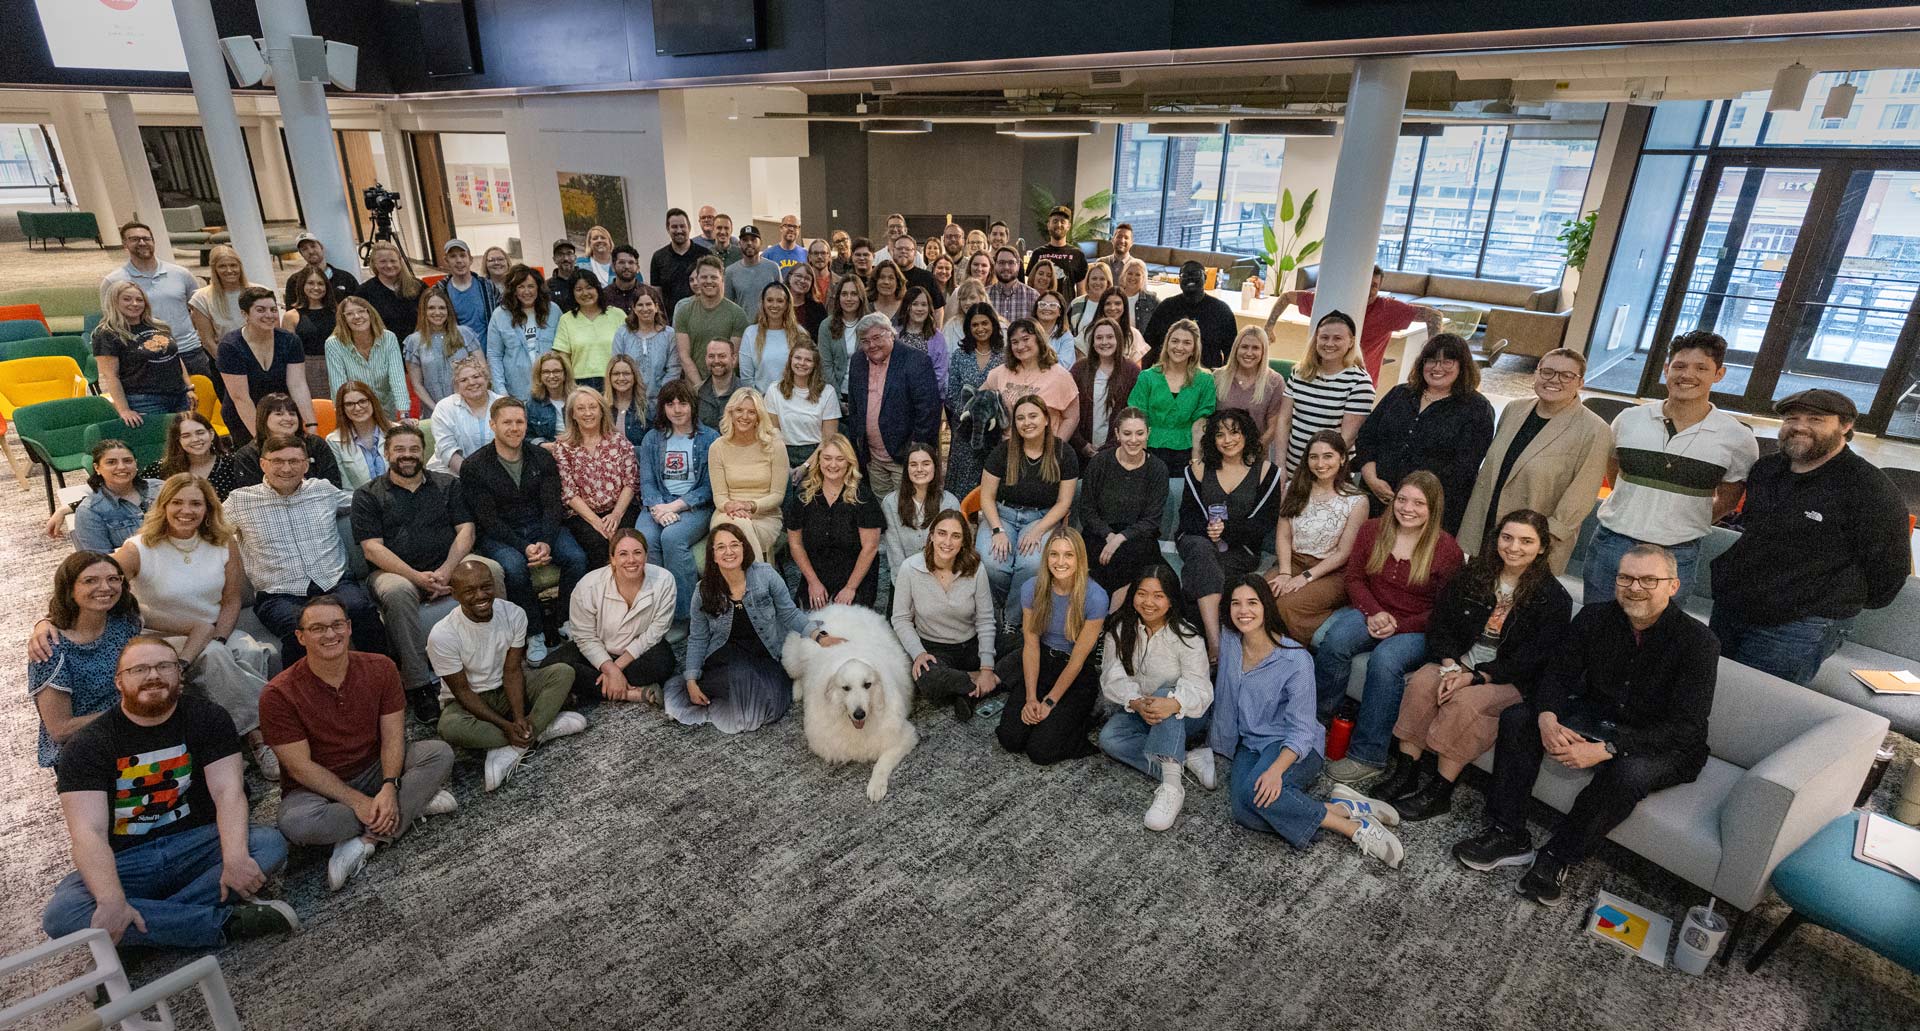 A large group portrait of the full Signal Theory staff all arranged in a tiered semi-circle in the Kansas City office atrium.